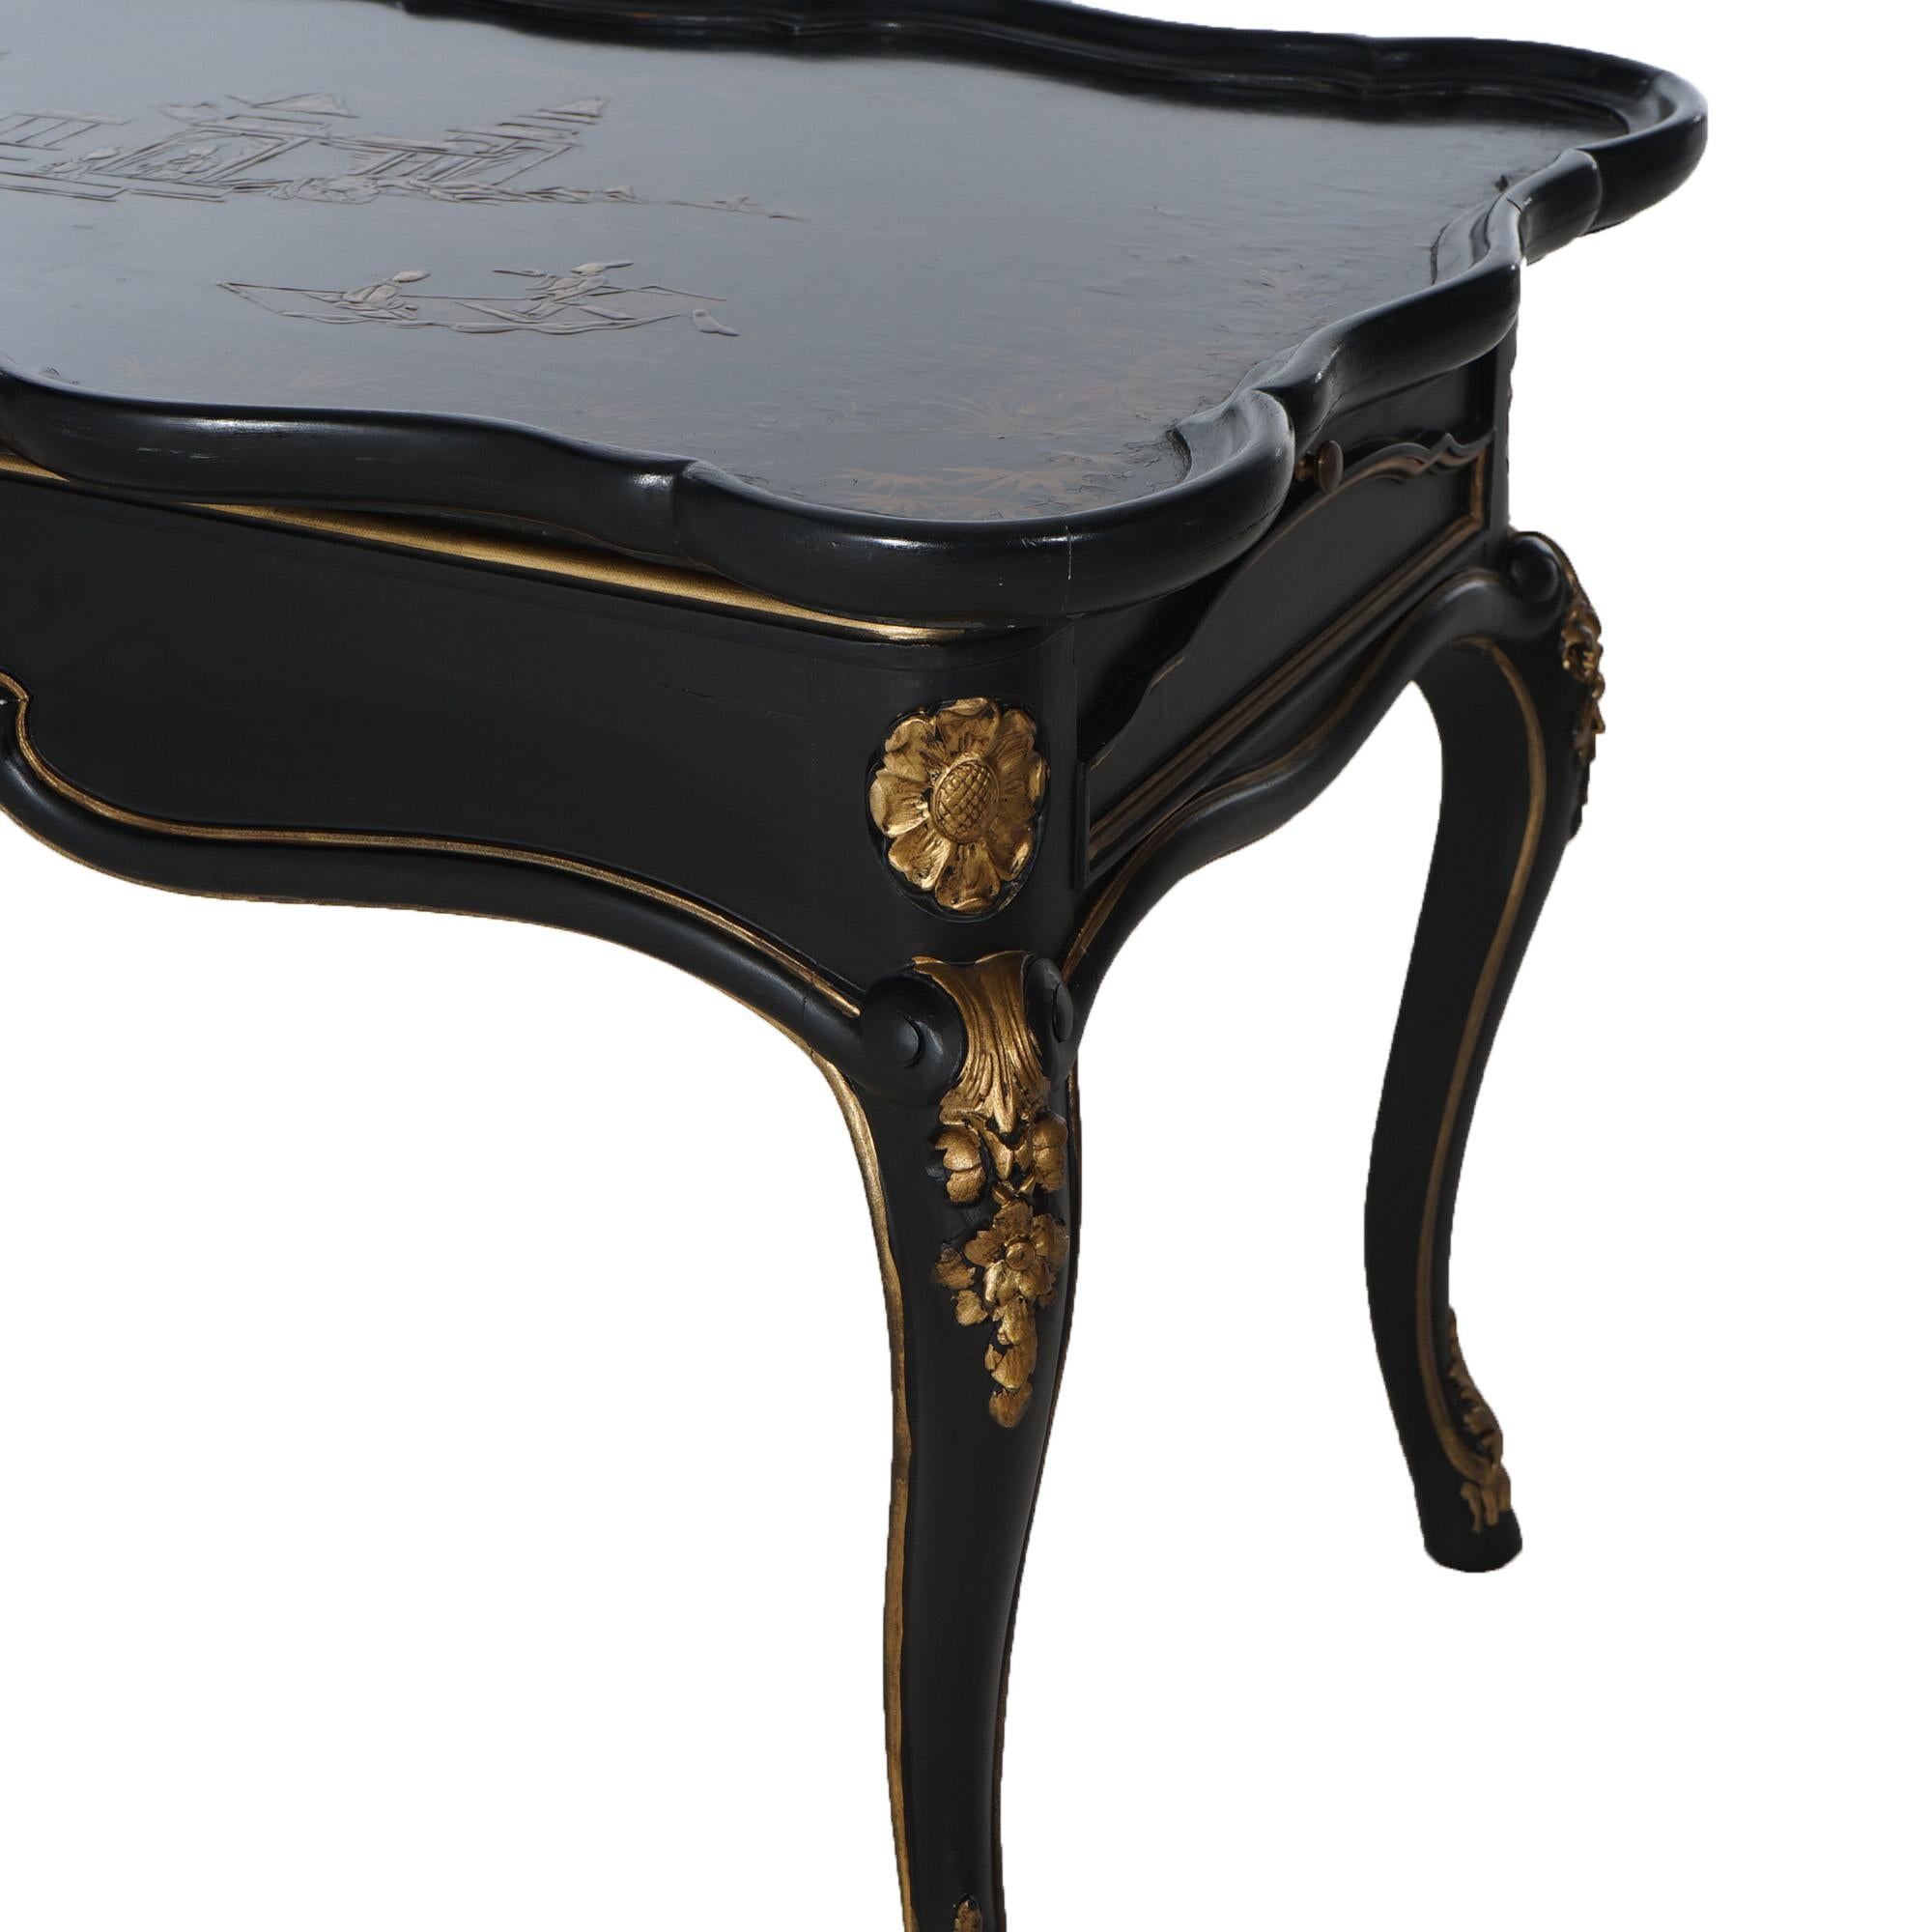  Antique French Style Chinoiserie Gilt Decorated Ebonized Low Tea Table C1930 6